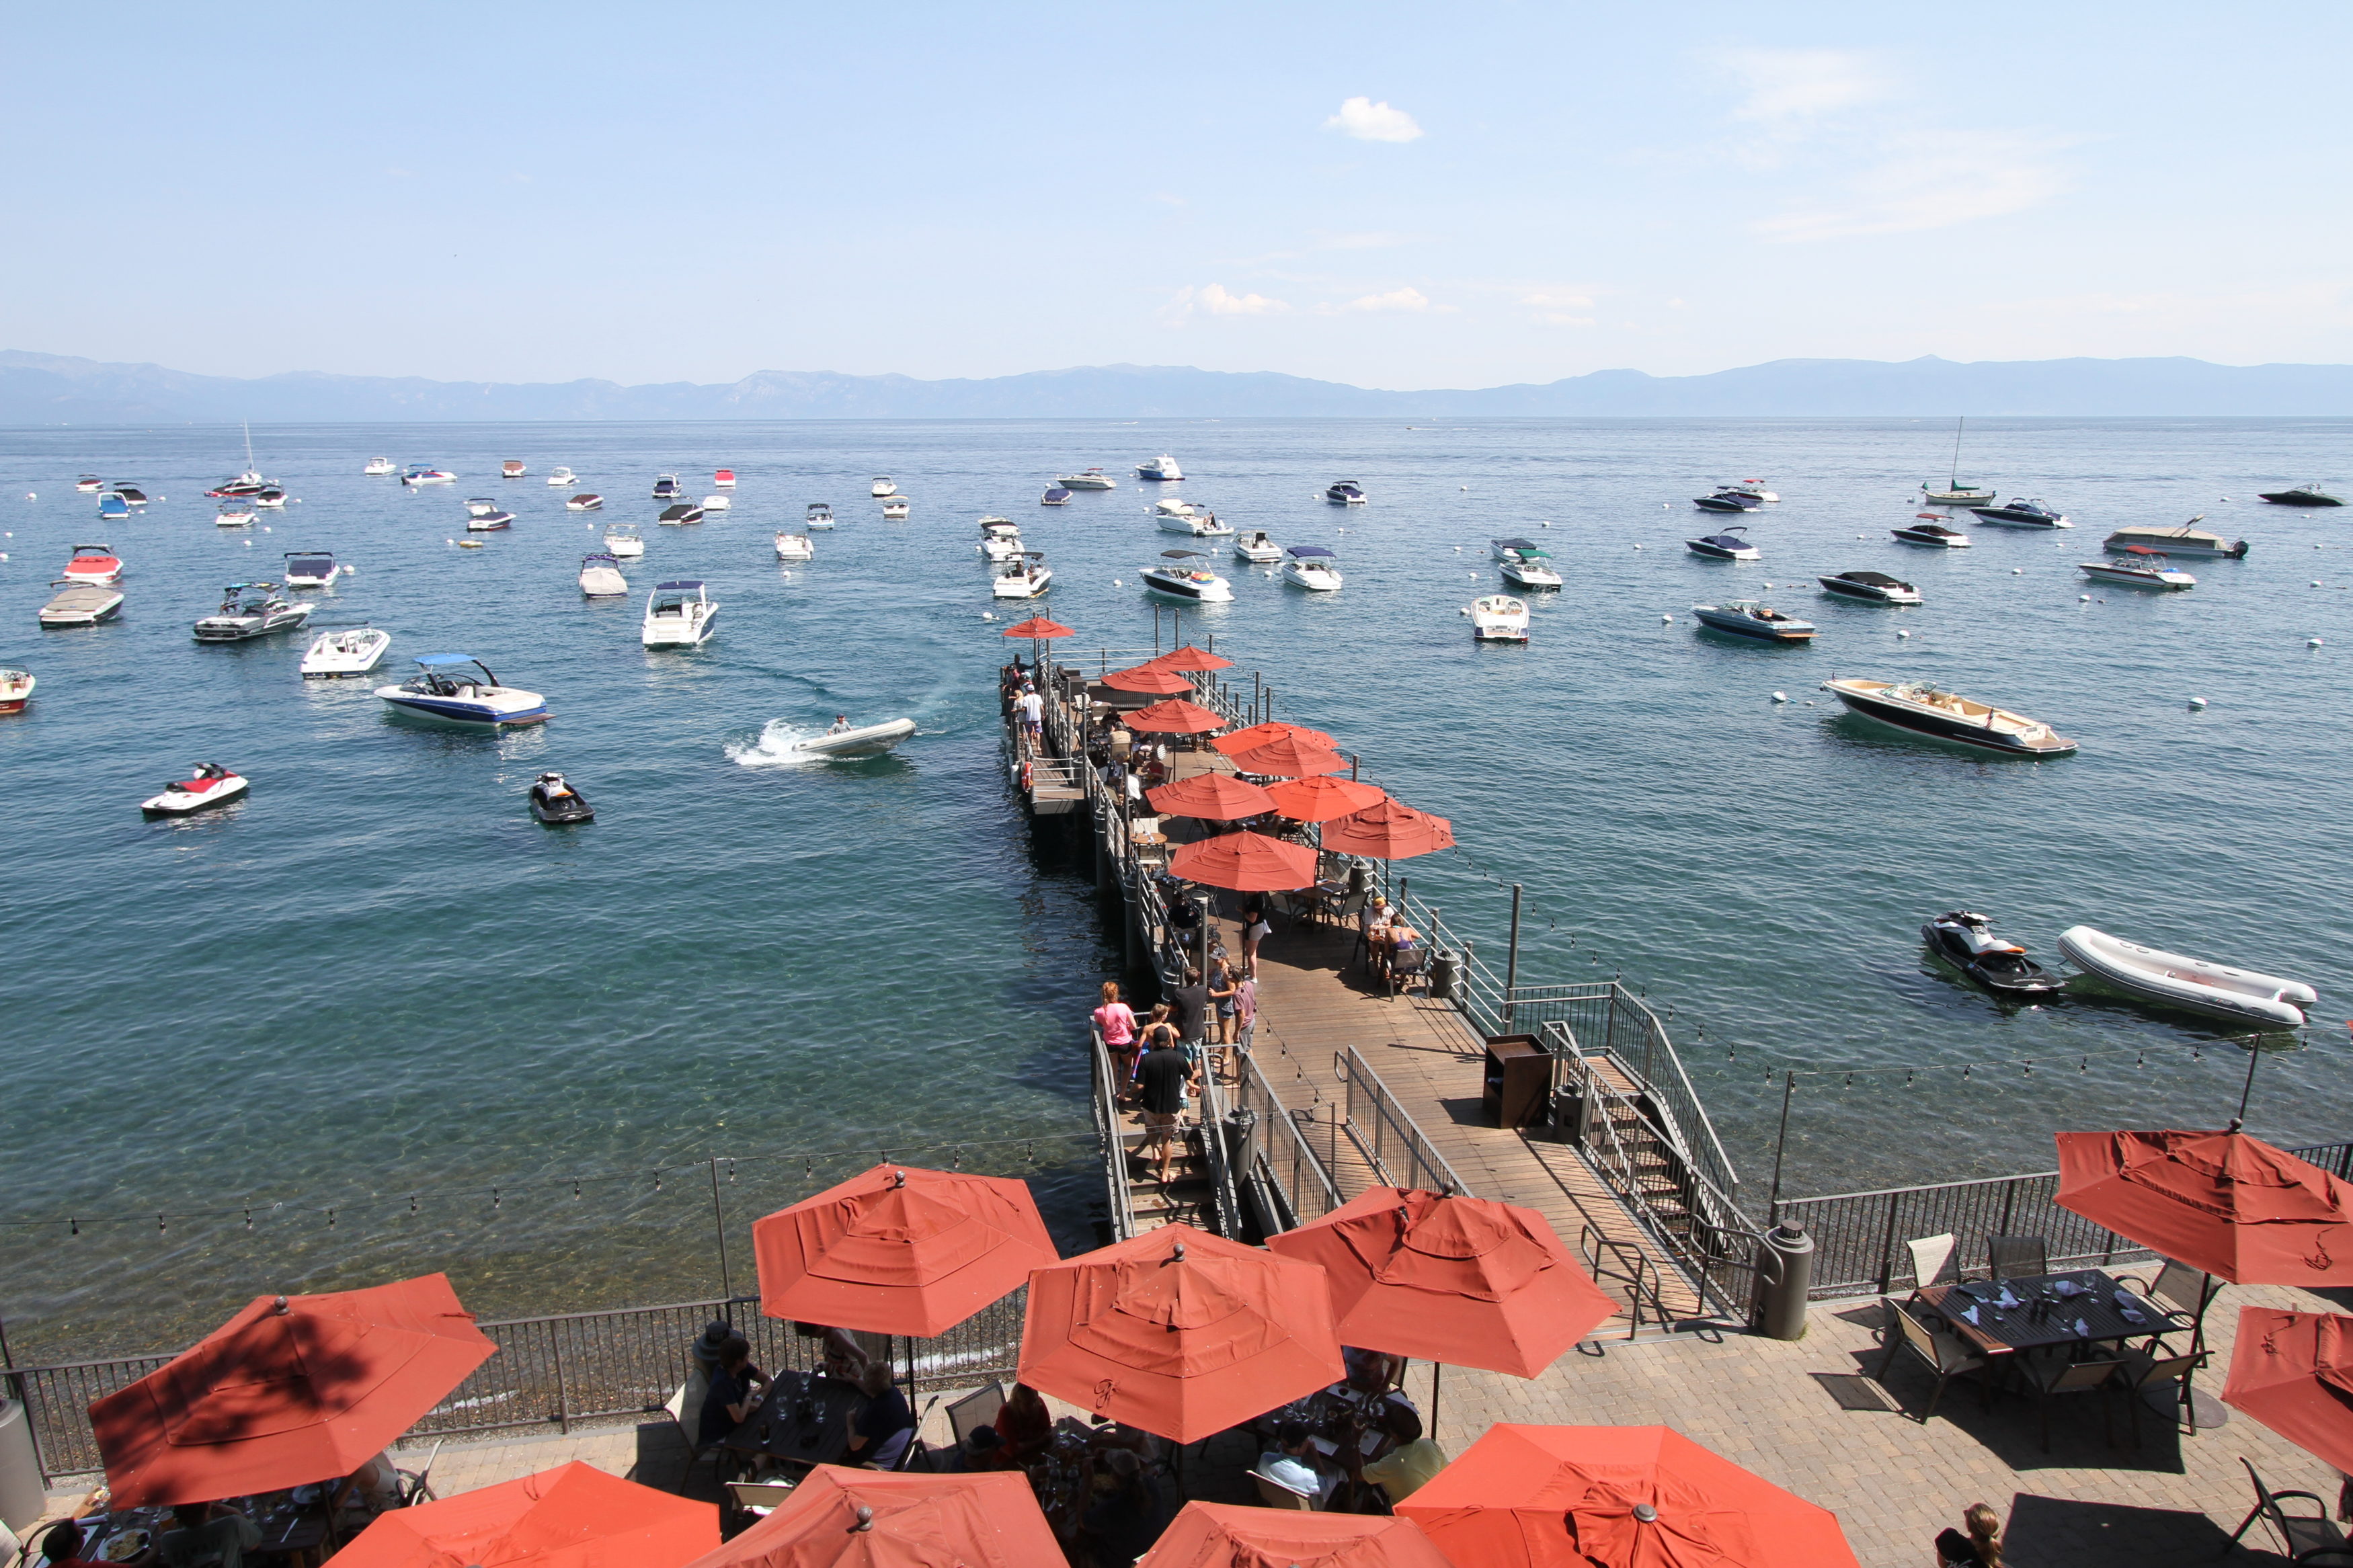 West shore cafe pier over looking lake tahoe with boats on buoys in the background.